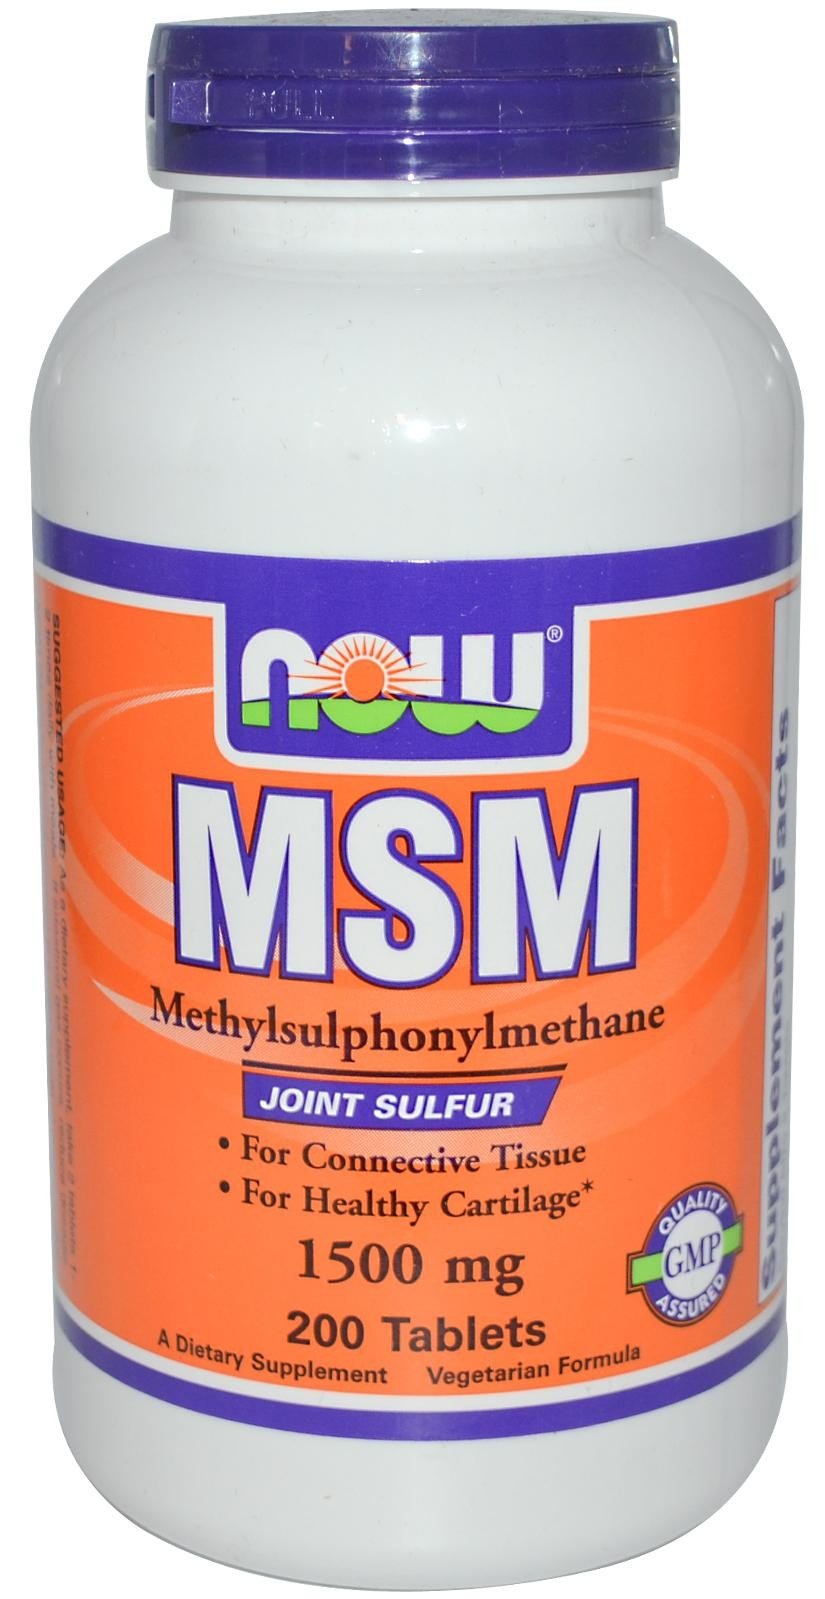 MSM 1500 mg, 200 piezas, Now. Para articulaciones y ligamentos. General Health Ligament and Joint strengthening 